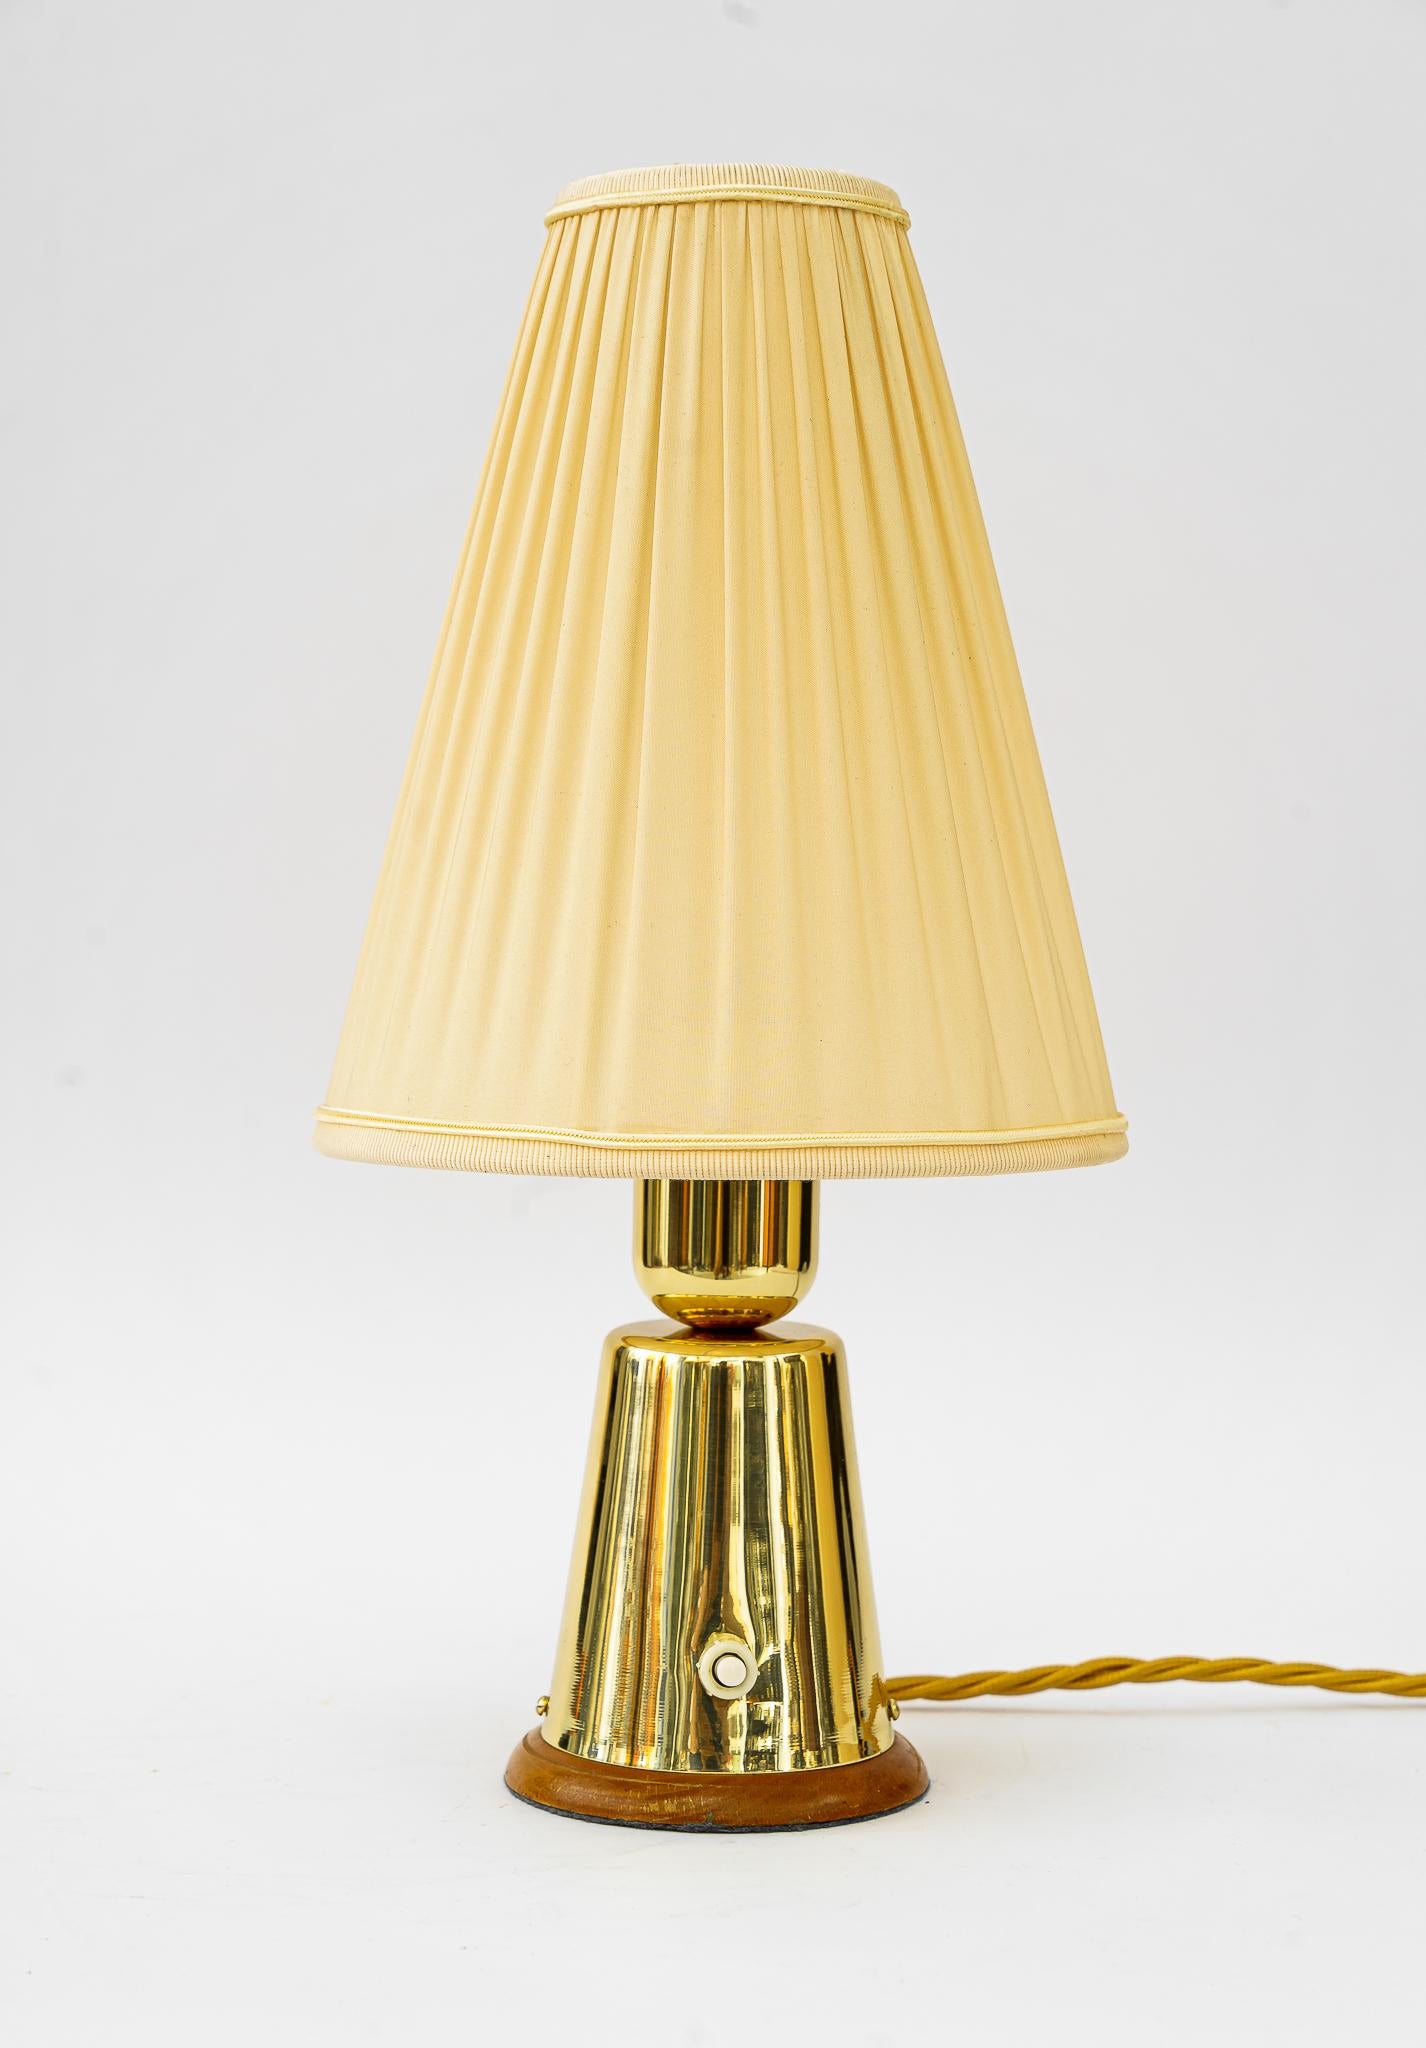 Table lamp with fabric shade vienna around 1950s 
Brass polished and stove enameled
The fabric shade is replaced ( new )
Wood polished.